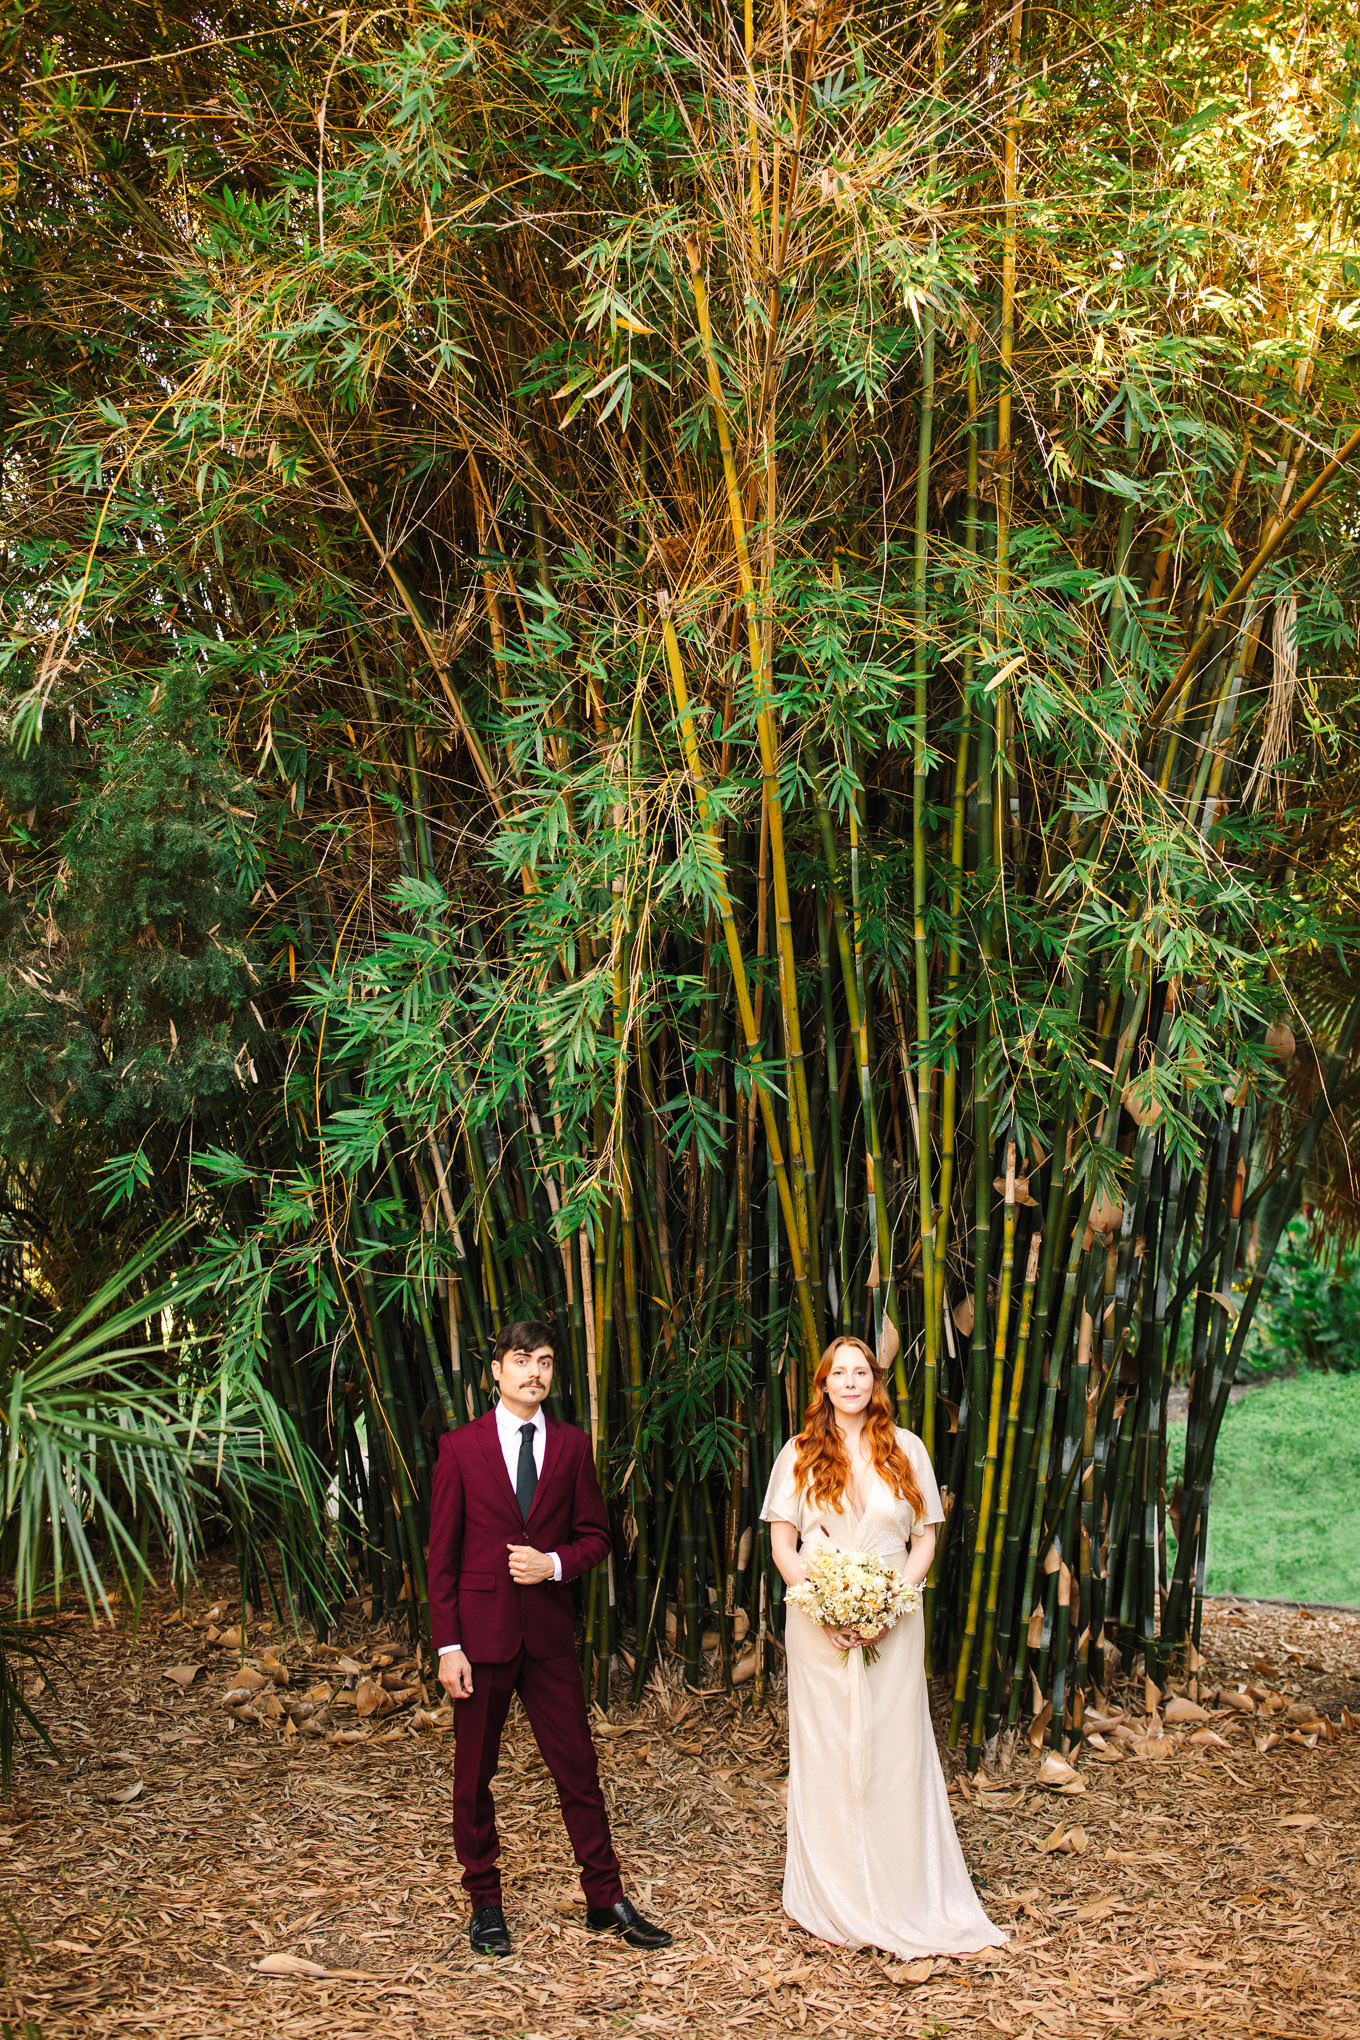 Bride and groom standing in front of bamboo plants